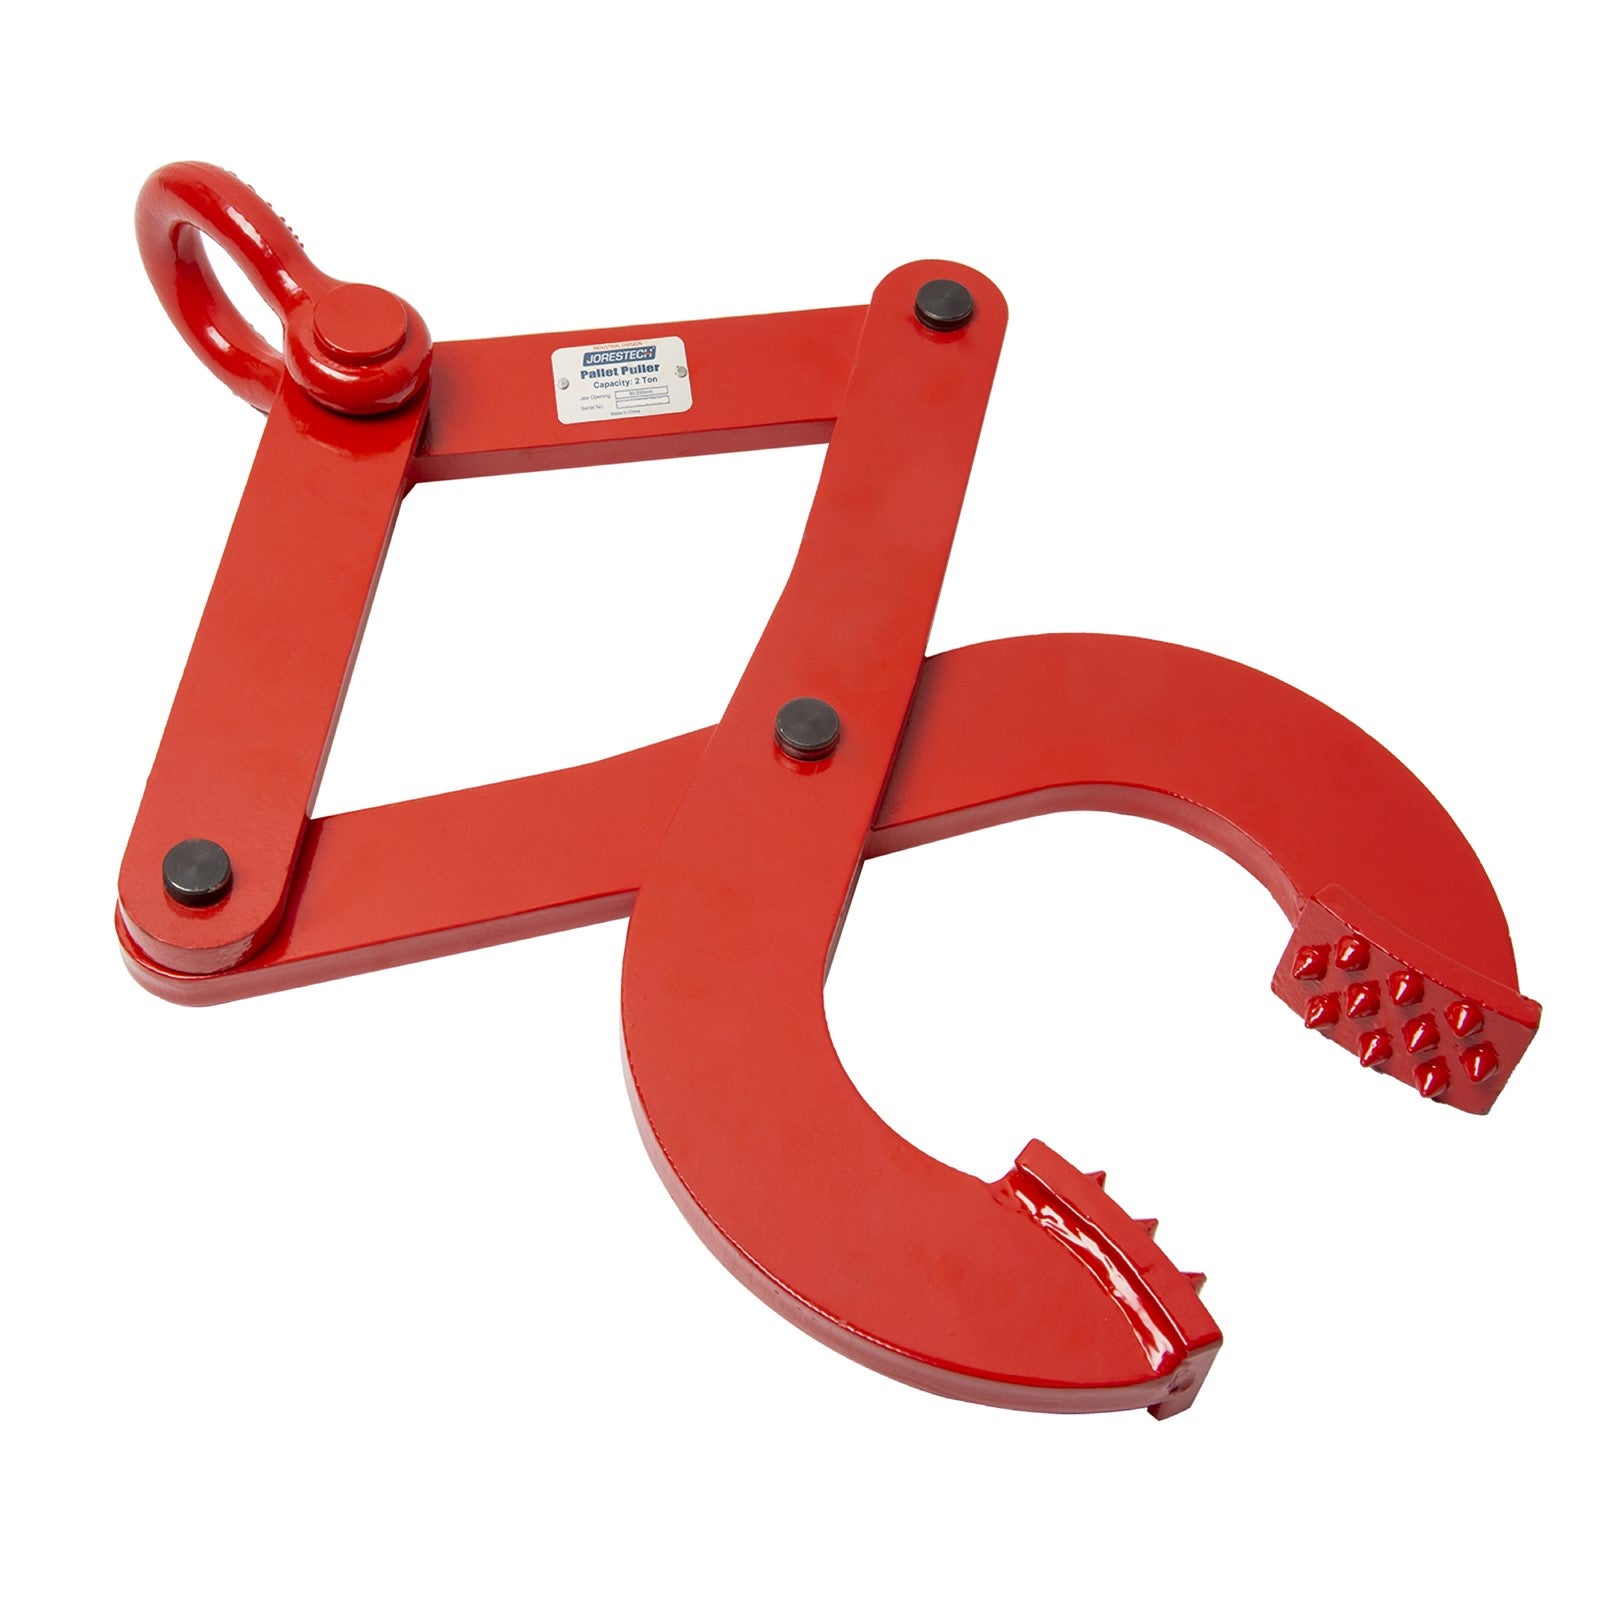  Single scissor pallet puller clamp for 4400 Lbs or 2000 Kg by JORES TECHNOLOGIES®